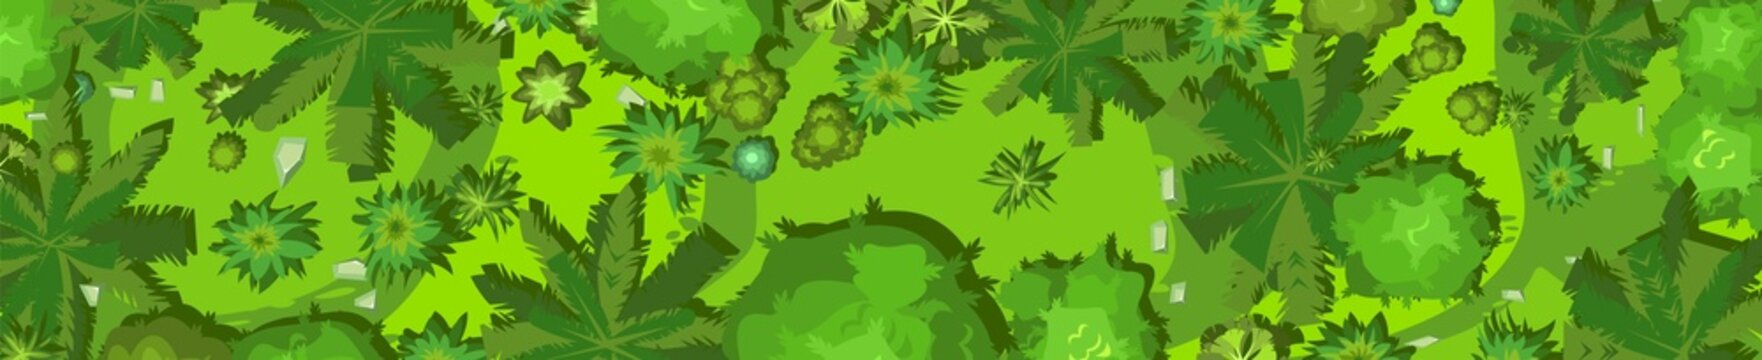 Beautiful summer jungle landscape with trees. View from above. Illustration in a flat style. Scenarios from above. Cartoon design. Vector.